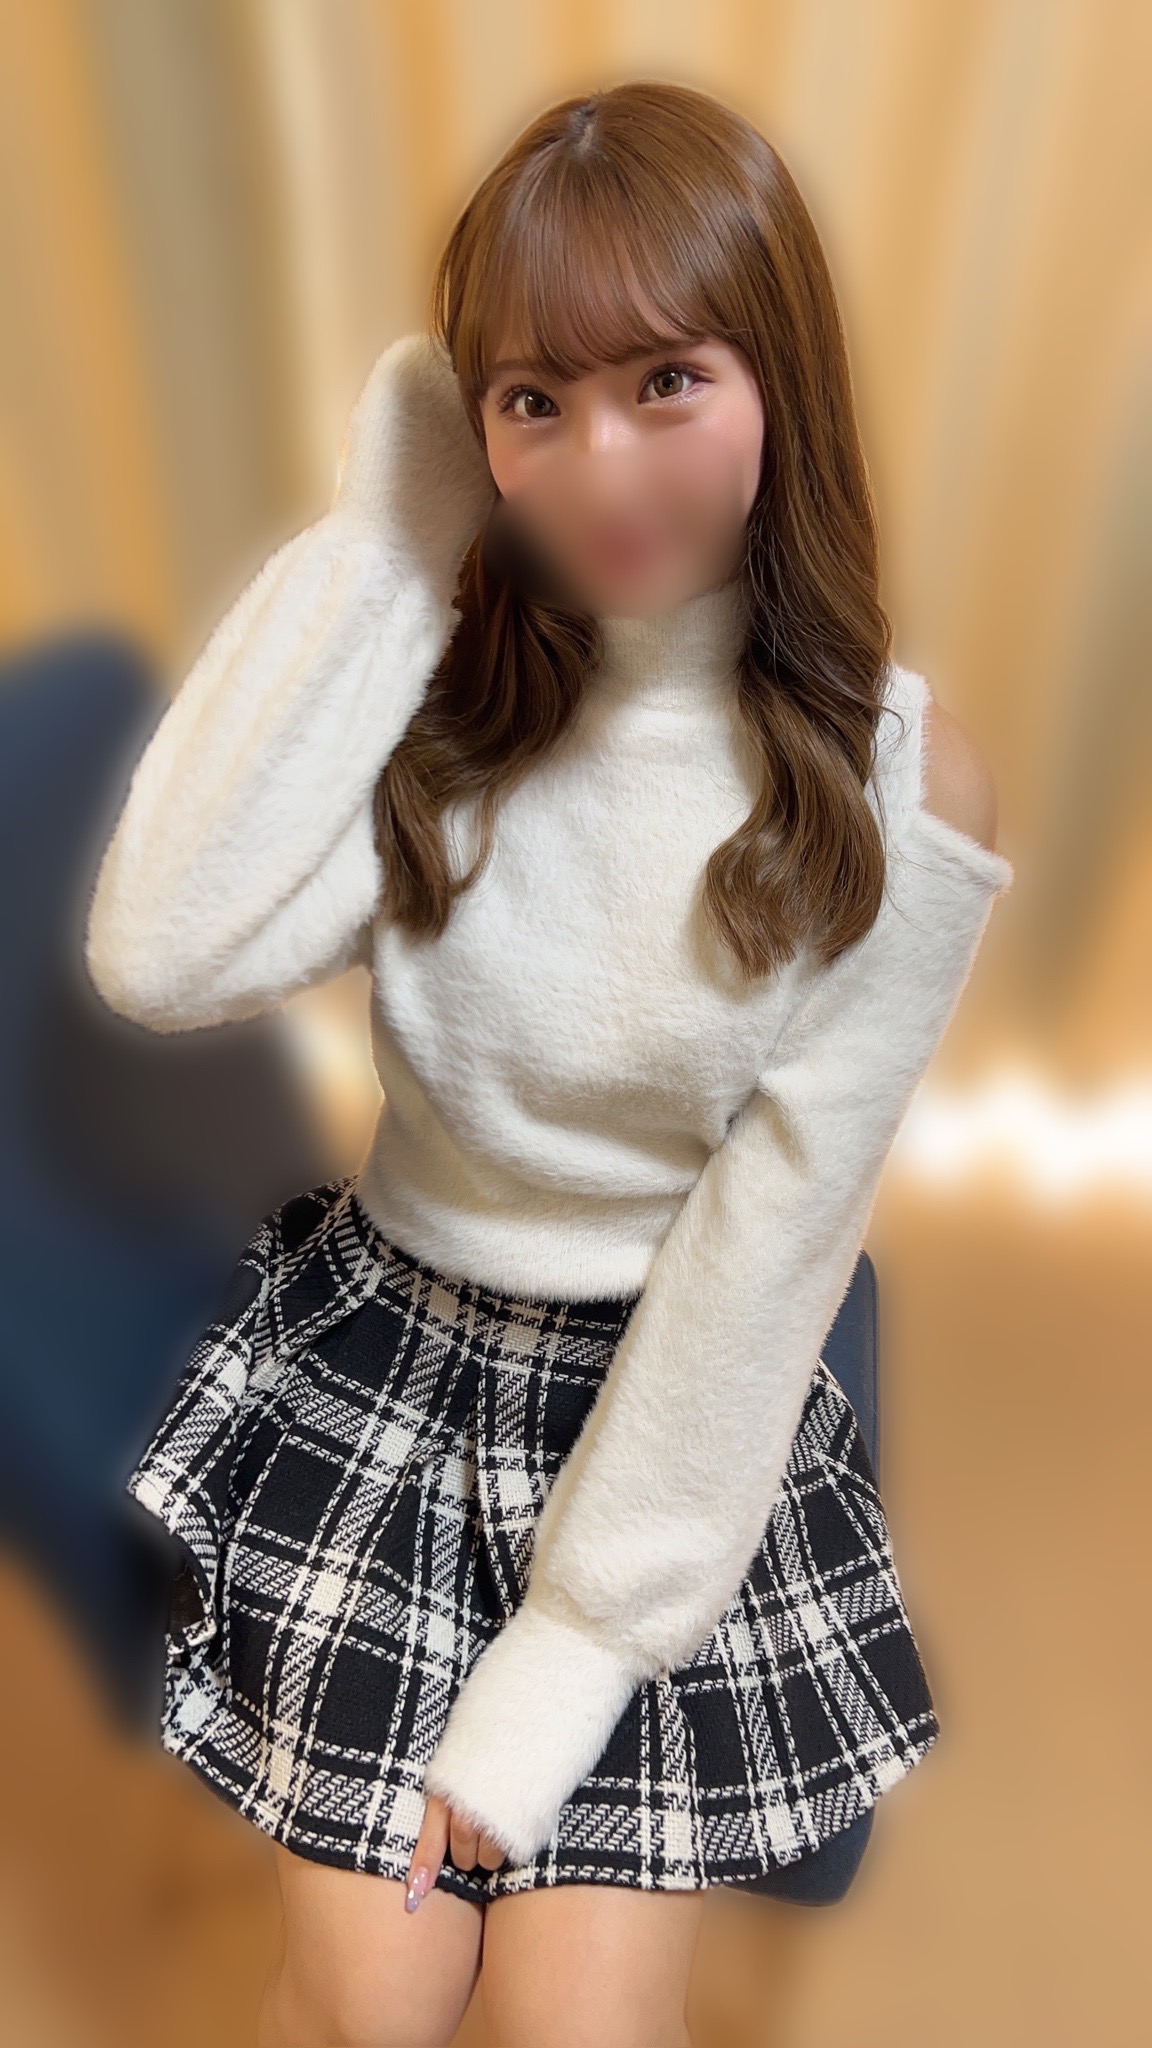 Sad news Rina-chan multiple 3P private clothes final chapter Finish with 2 consecutive cum cum shots from the virgins unwashed cock right at the entrance You can no longer see her private clothes